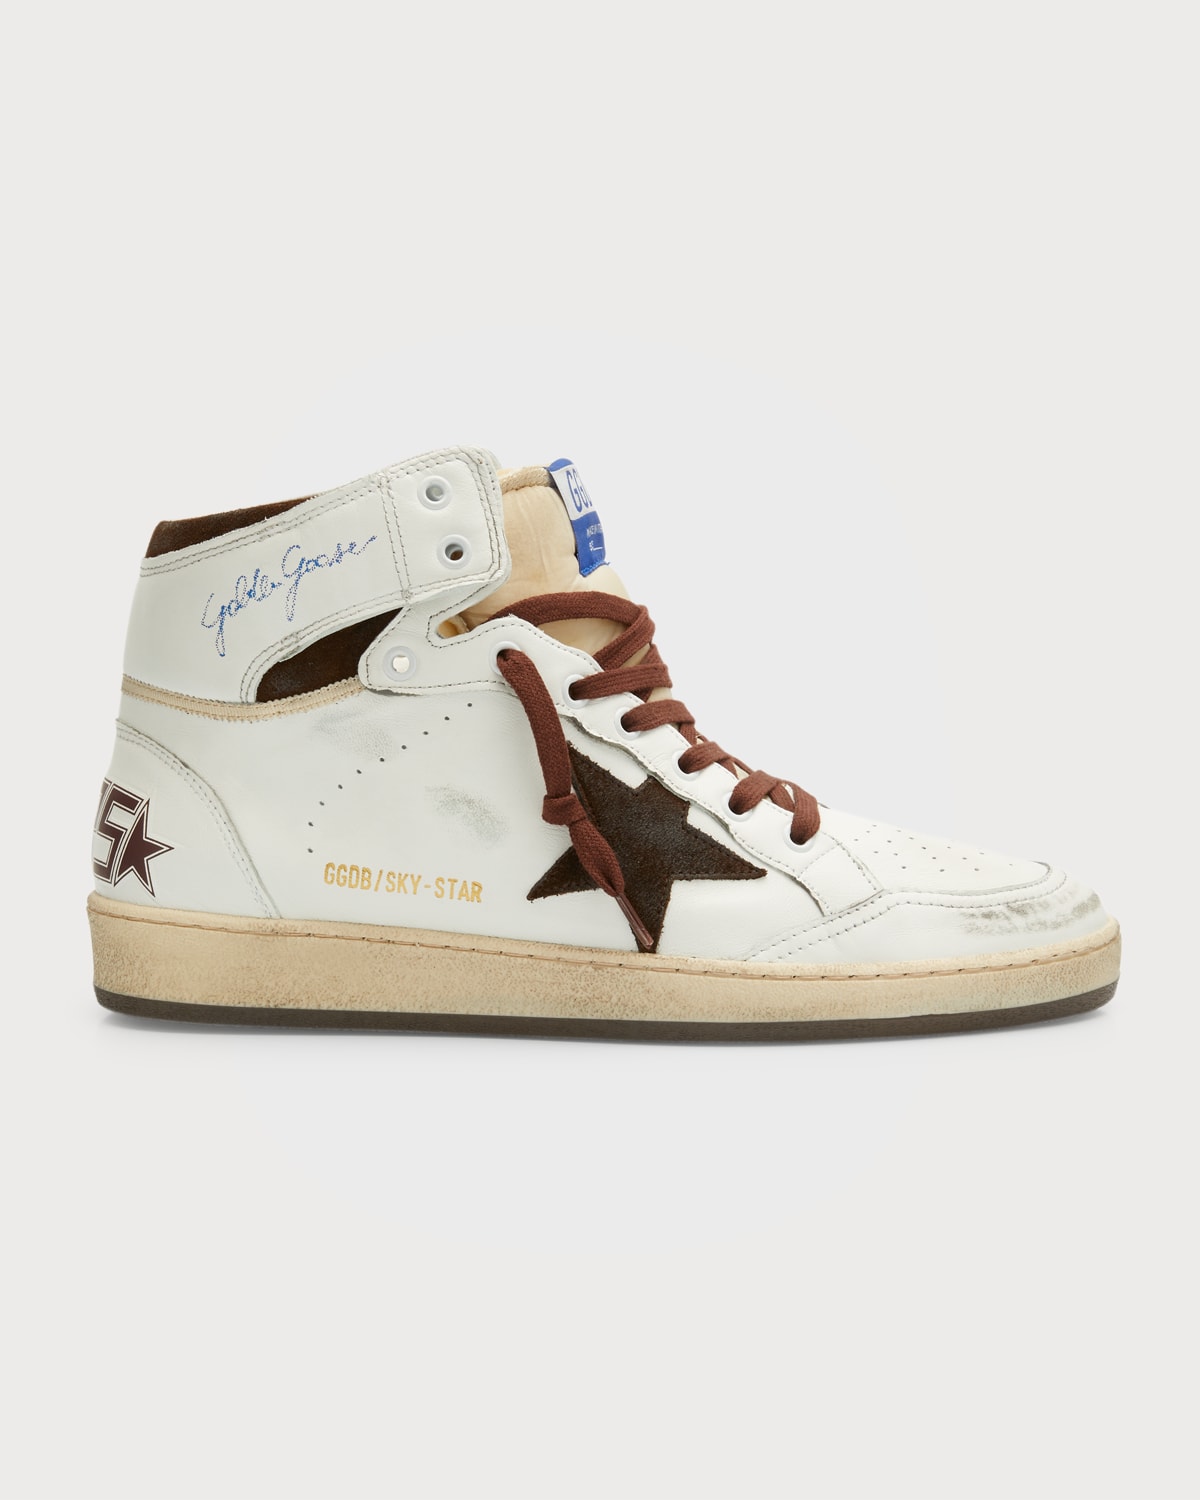 Men's Sky Star Leather High-Top Sneakers